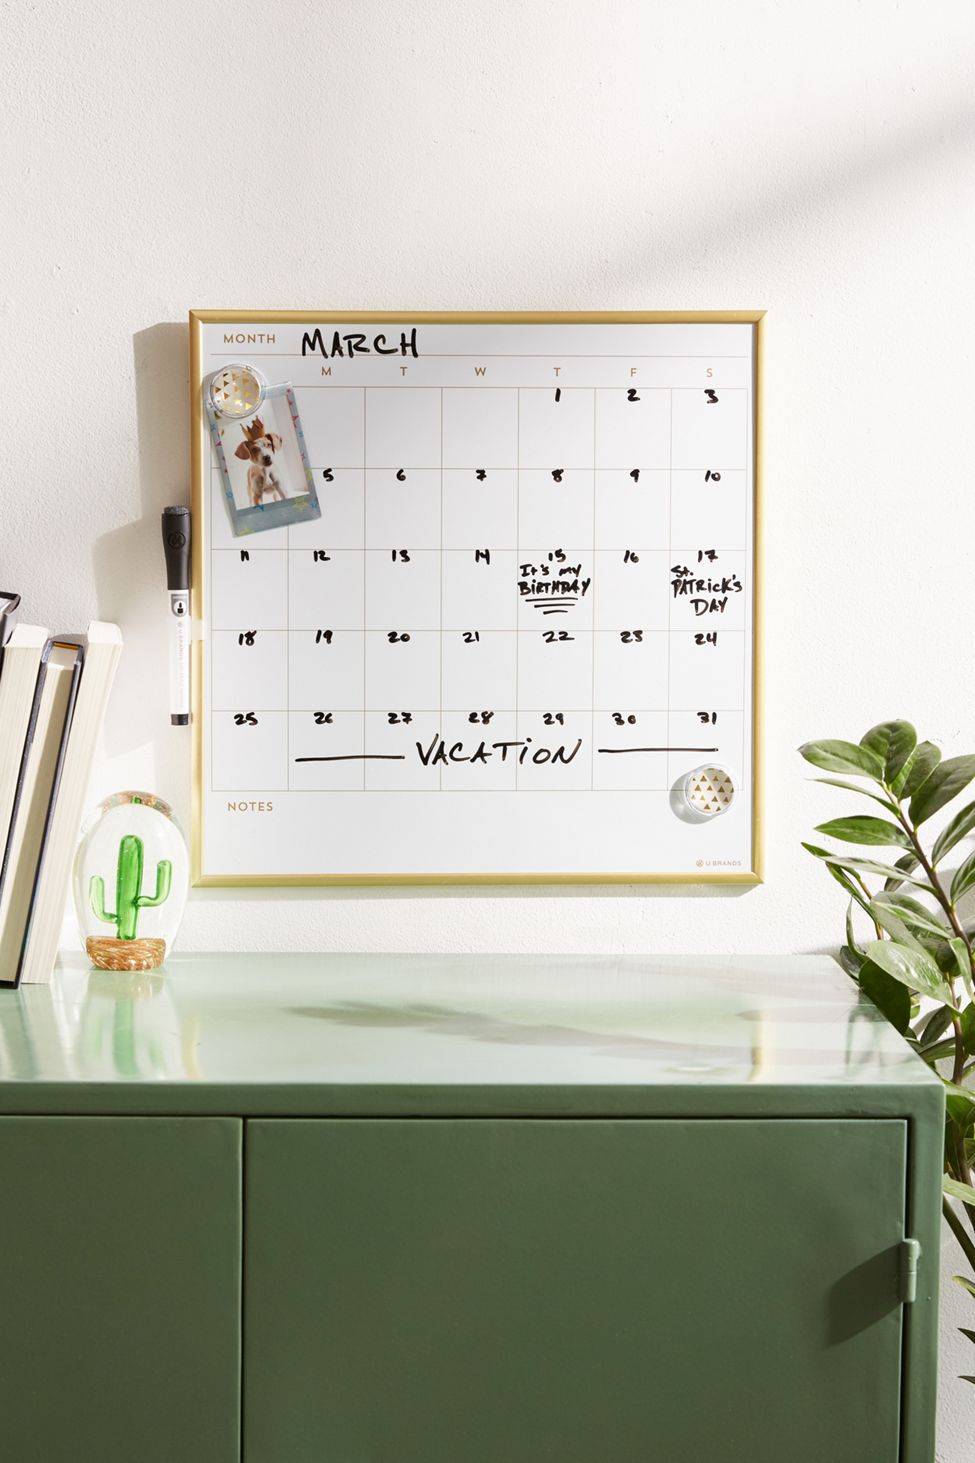 Mini 2020 Calendar for Bulletin Board Seasons with Stickers for Calendars 8x6 Monthly Wall Calendar Use Now from Sept 2019 to December 2020 Small Wall Calendar 2020 Hanging Calendar 